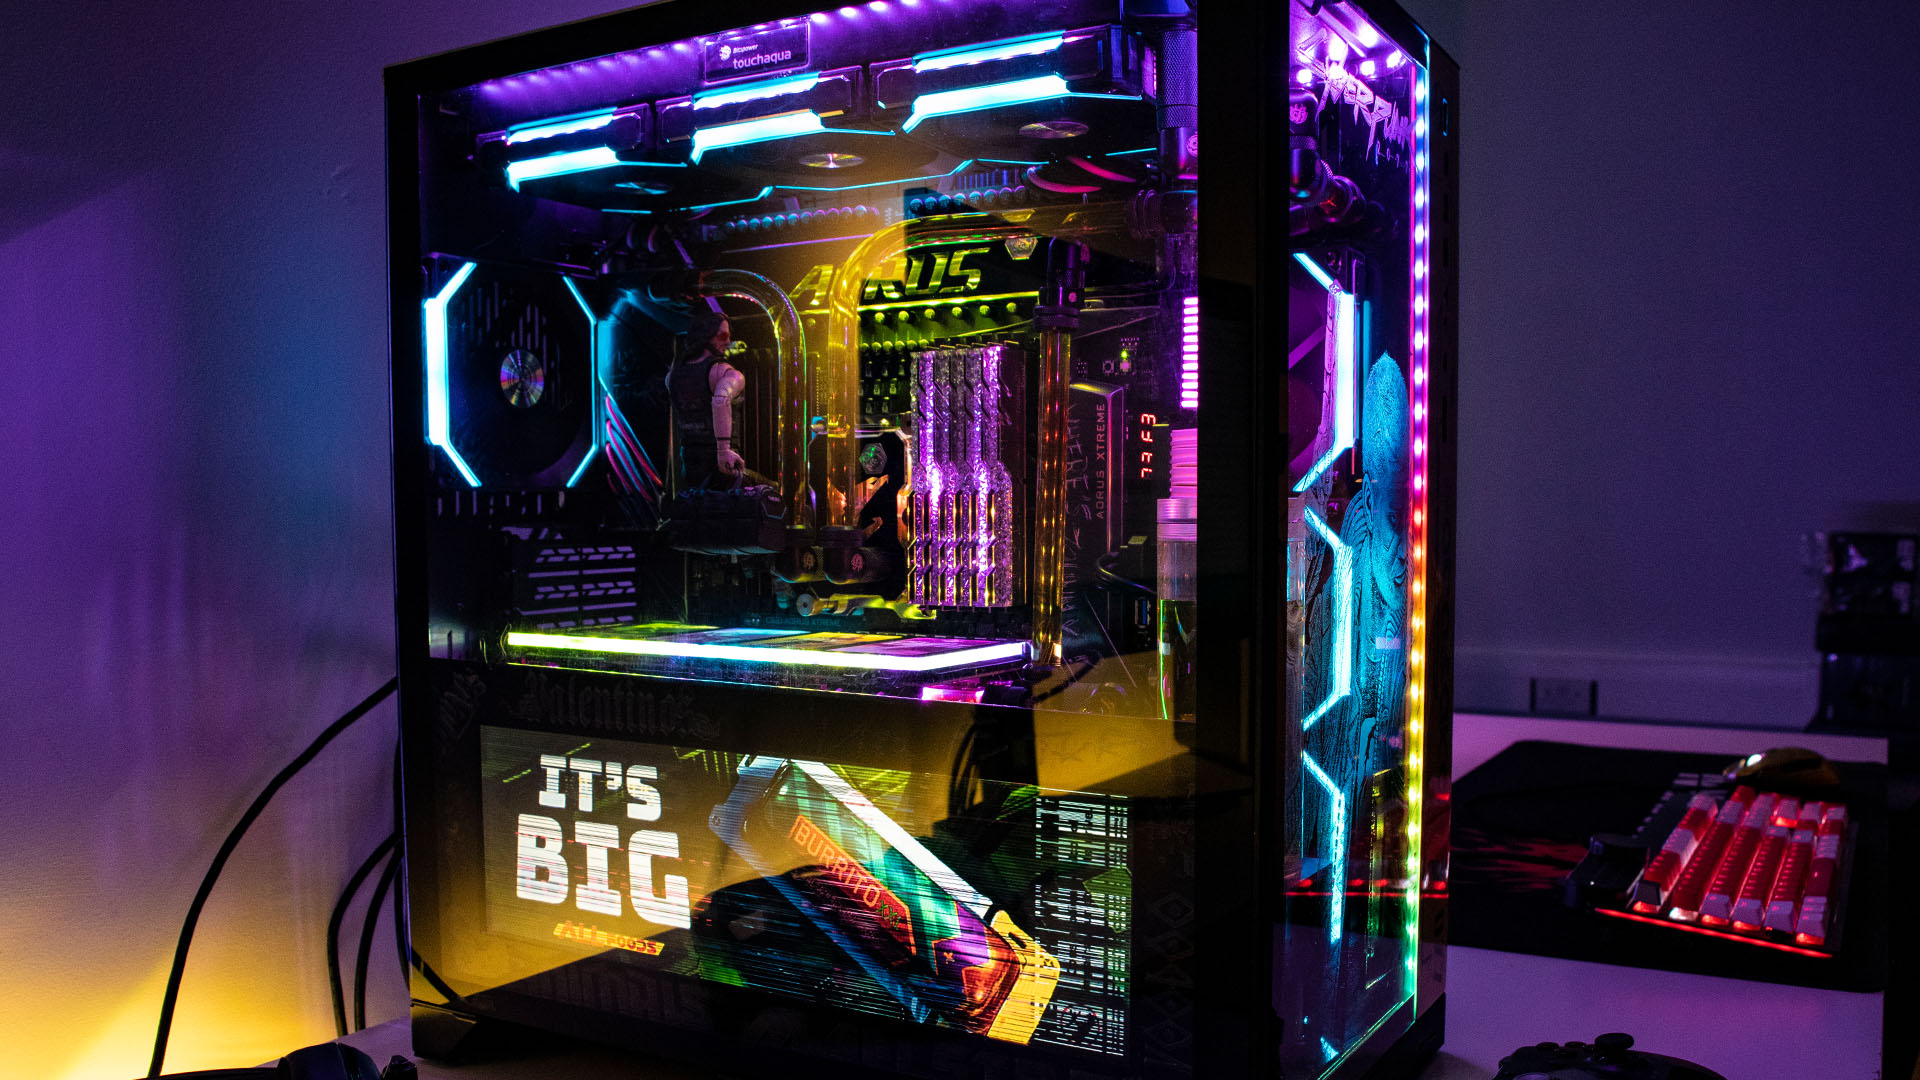 This Cyberpunk 2077 gaming PC build is straight out of Night City